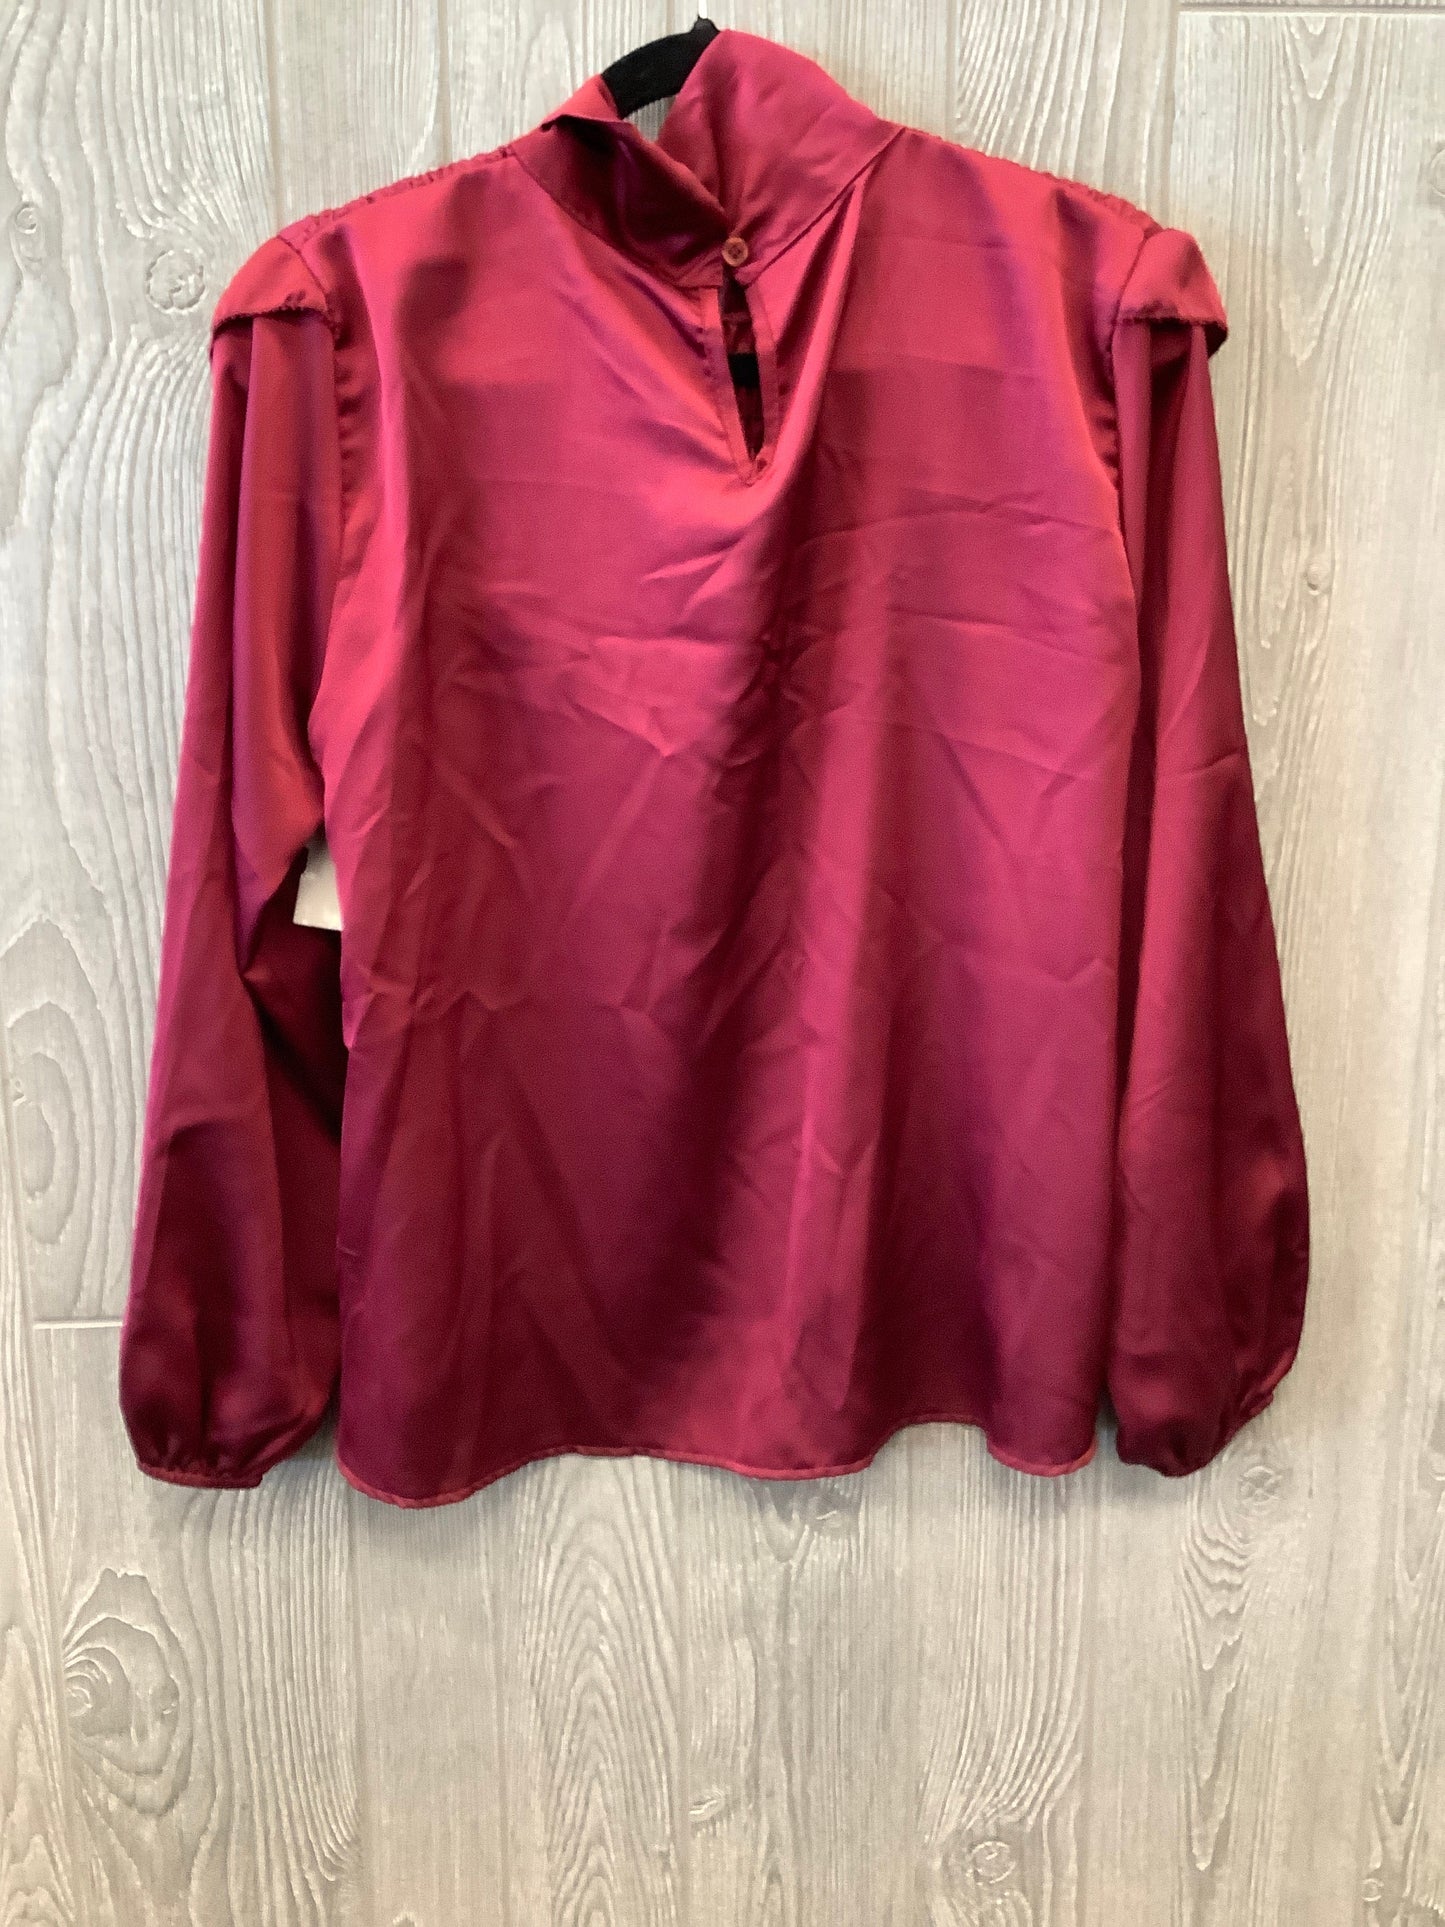 Red Blouse Long Sleeve Clothes Mentor, Size M